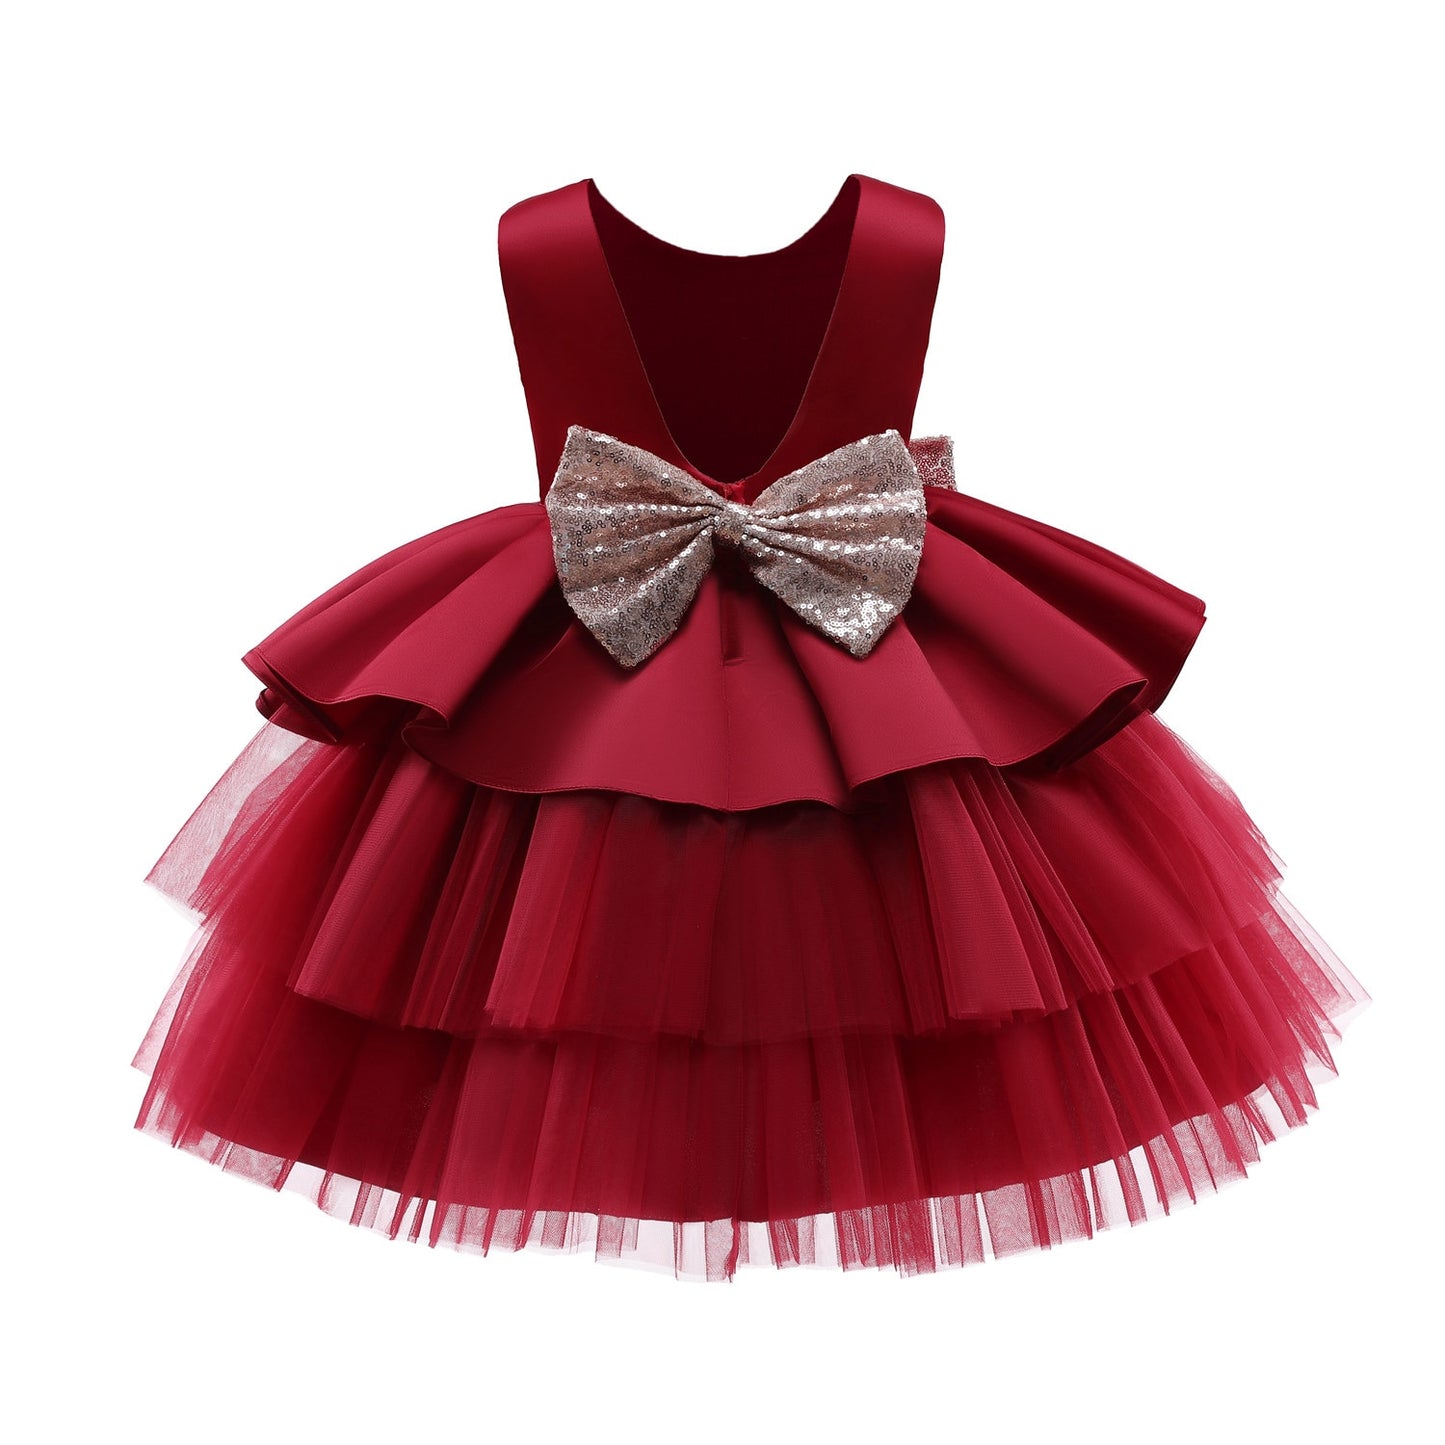 Children’s Girls Lace Party Dress